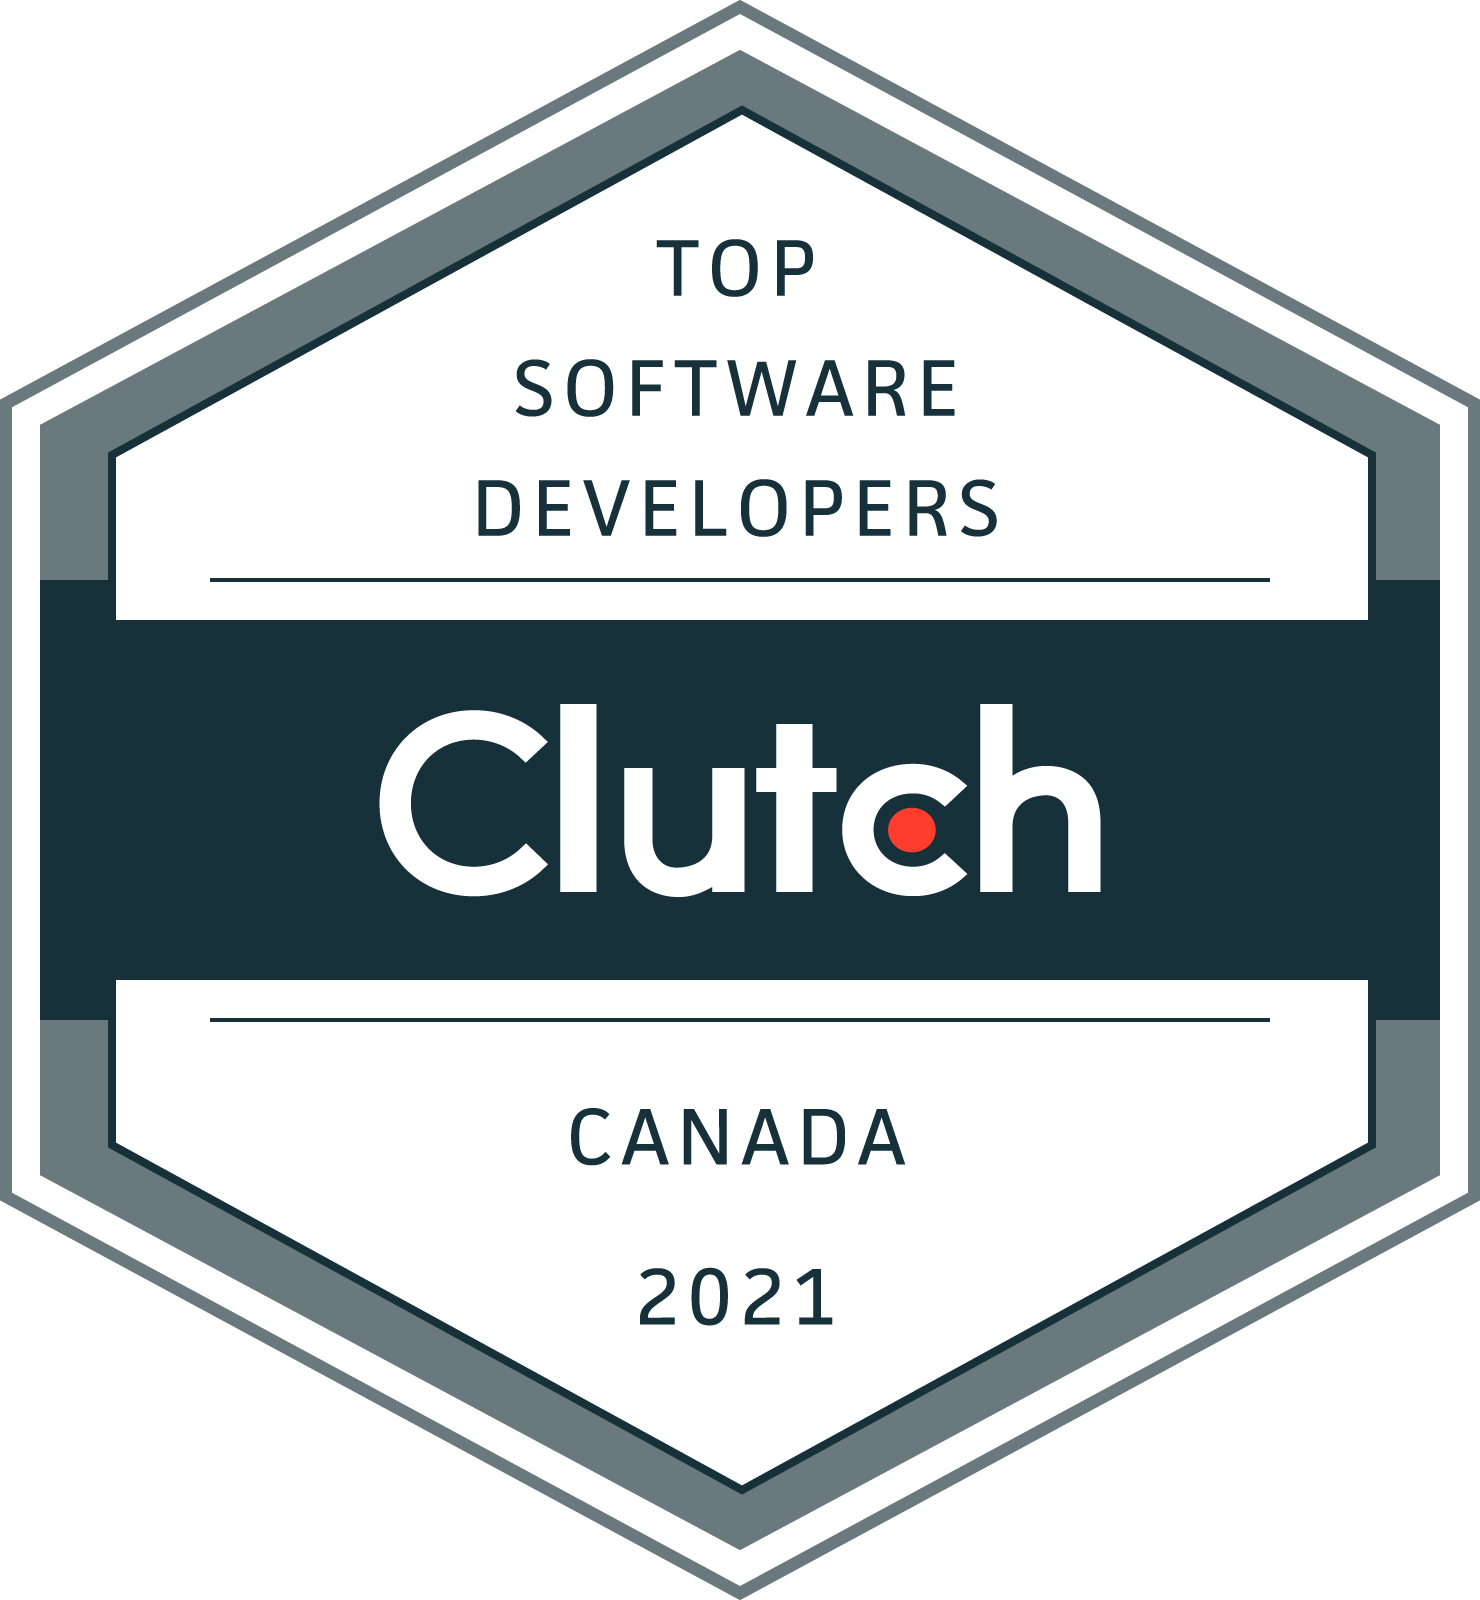 Canada's Top Software Developers Award 2021